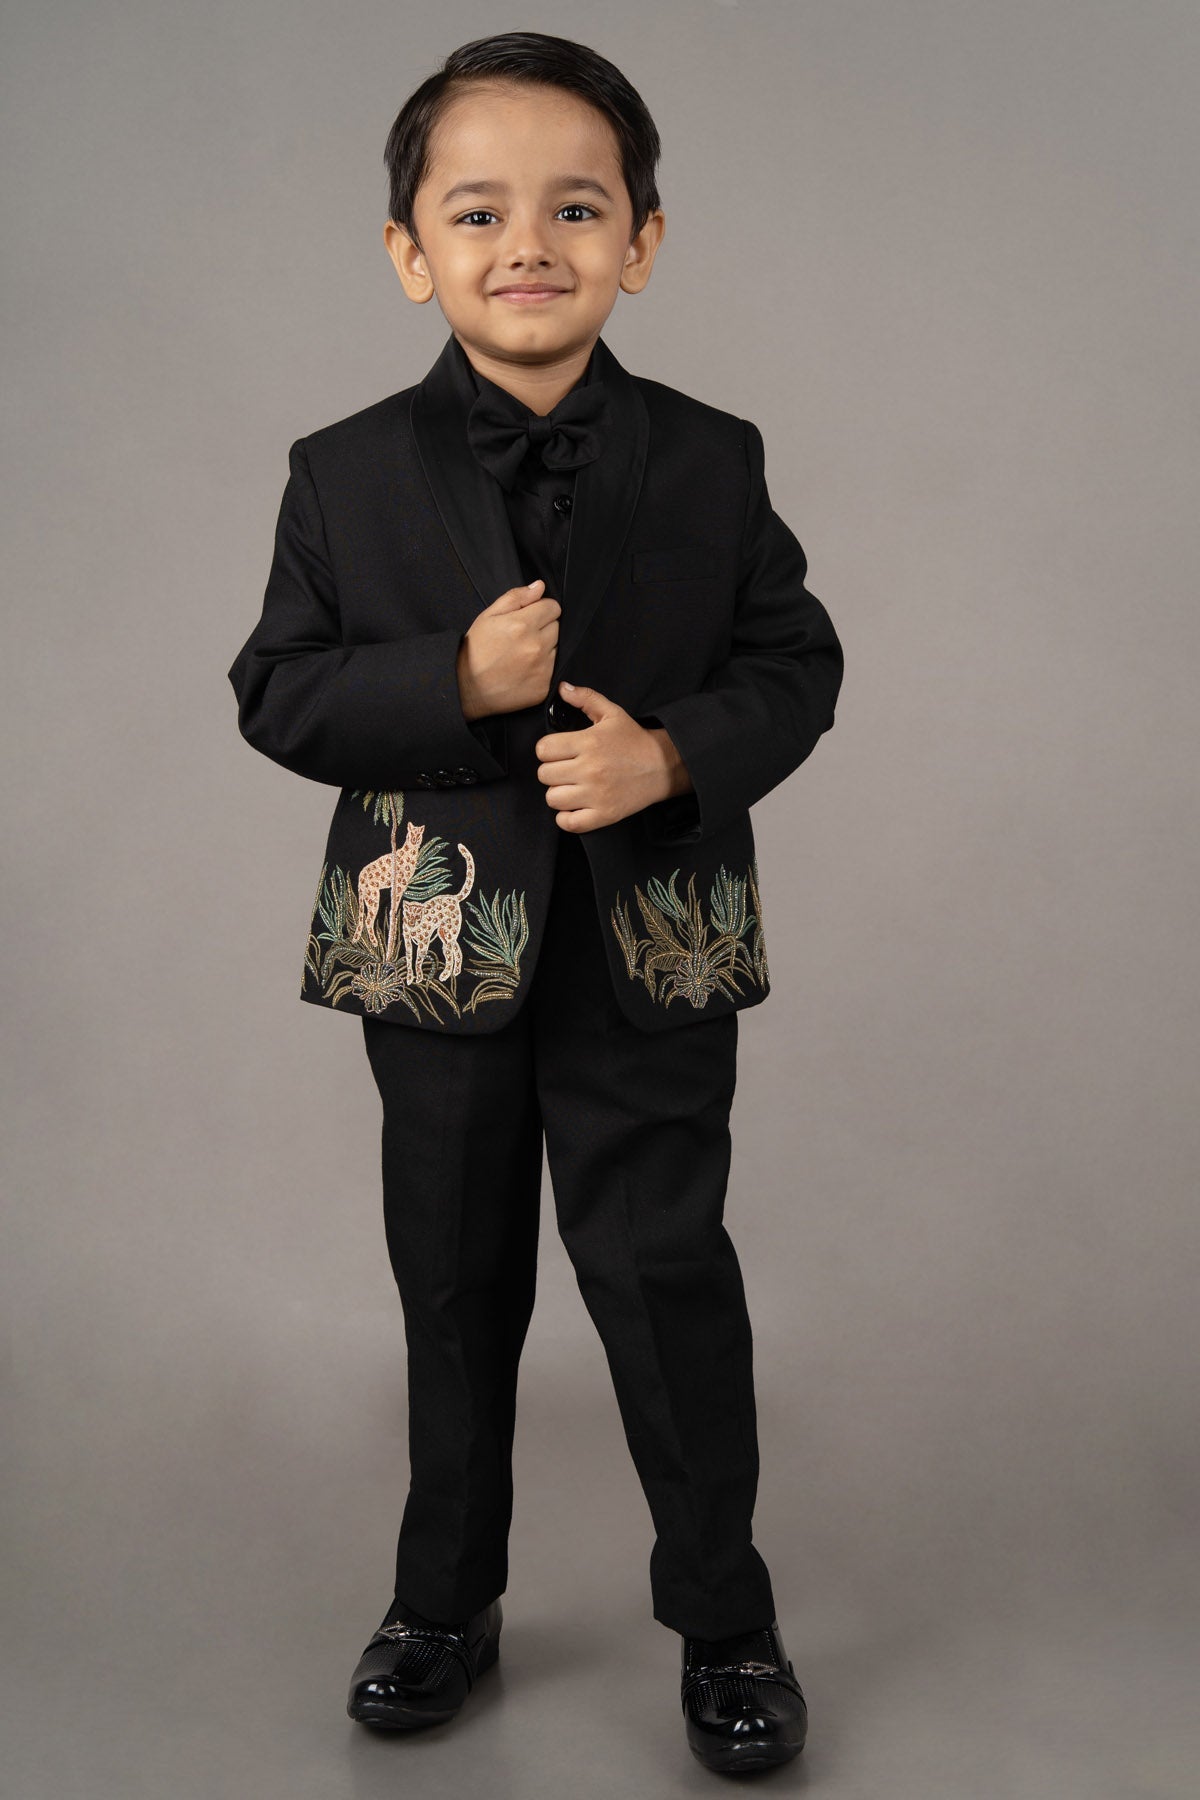 Designer Little Brats Black Cheetah Embroidered Suit For young Boys Available online at ScrollnShops